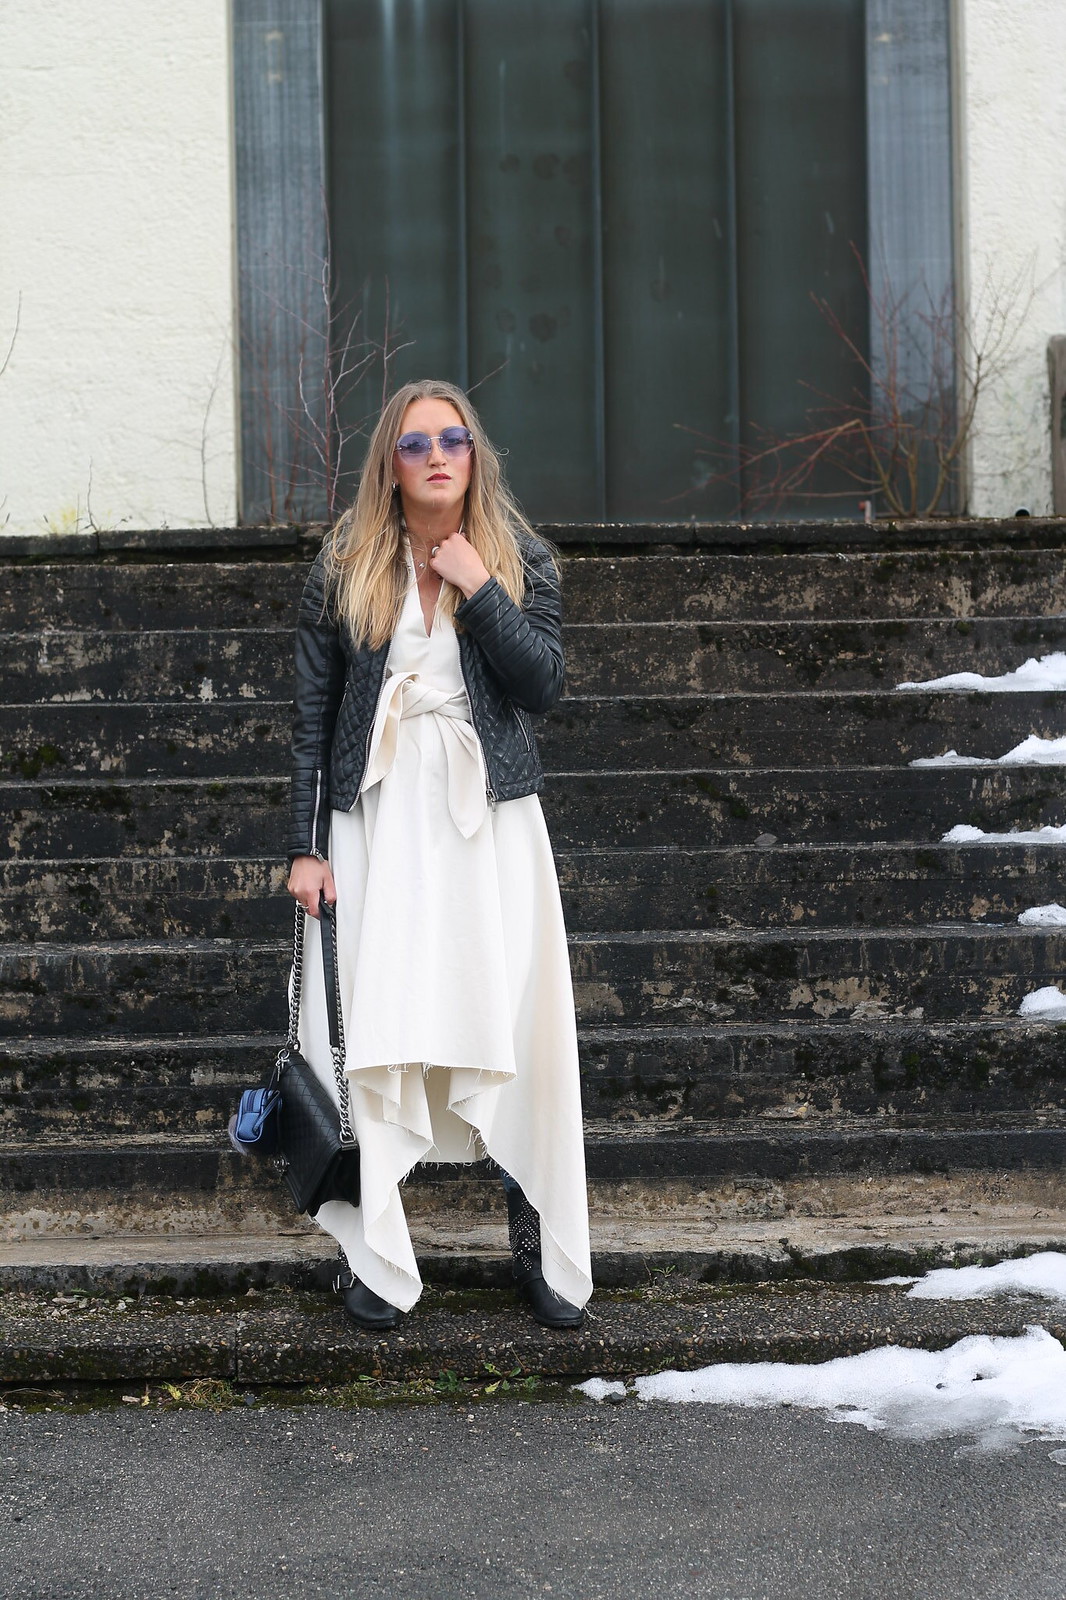 dress-over-jeans-whole-outfit-with-sunnies-wiebkembg